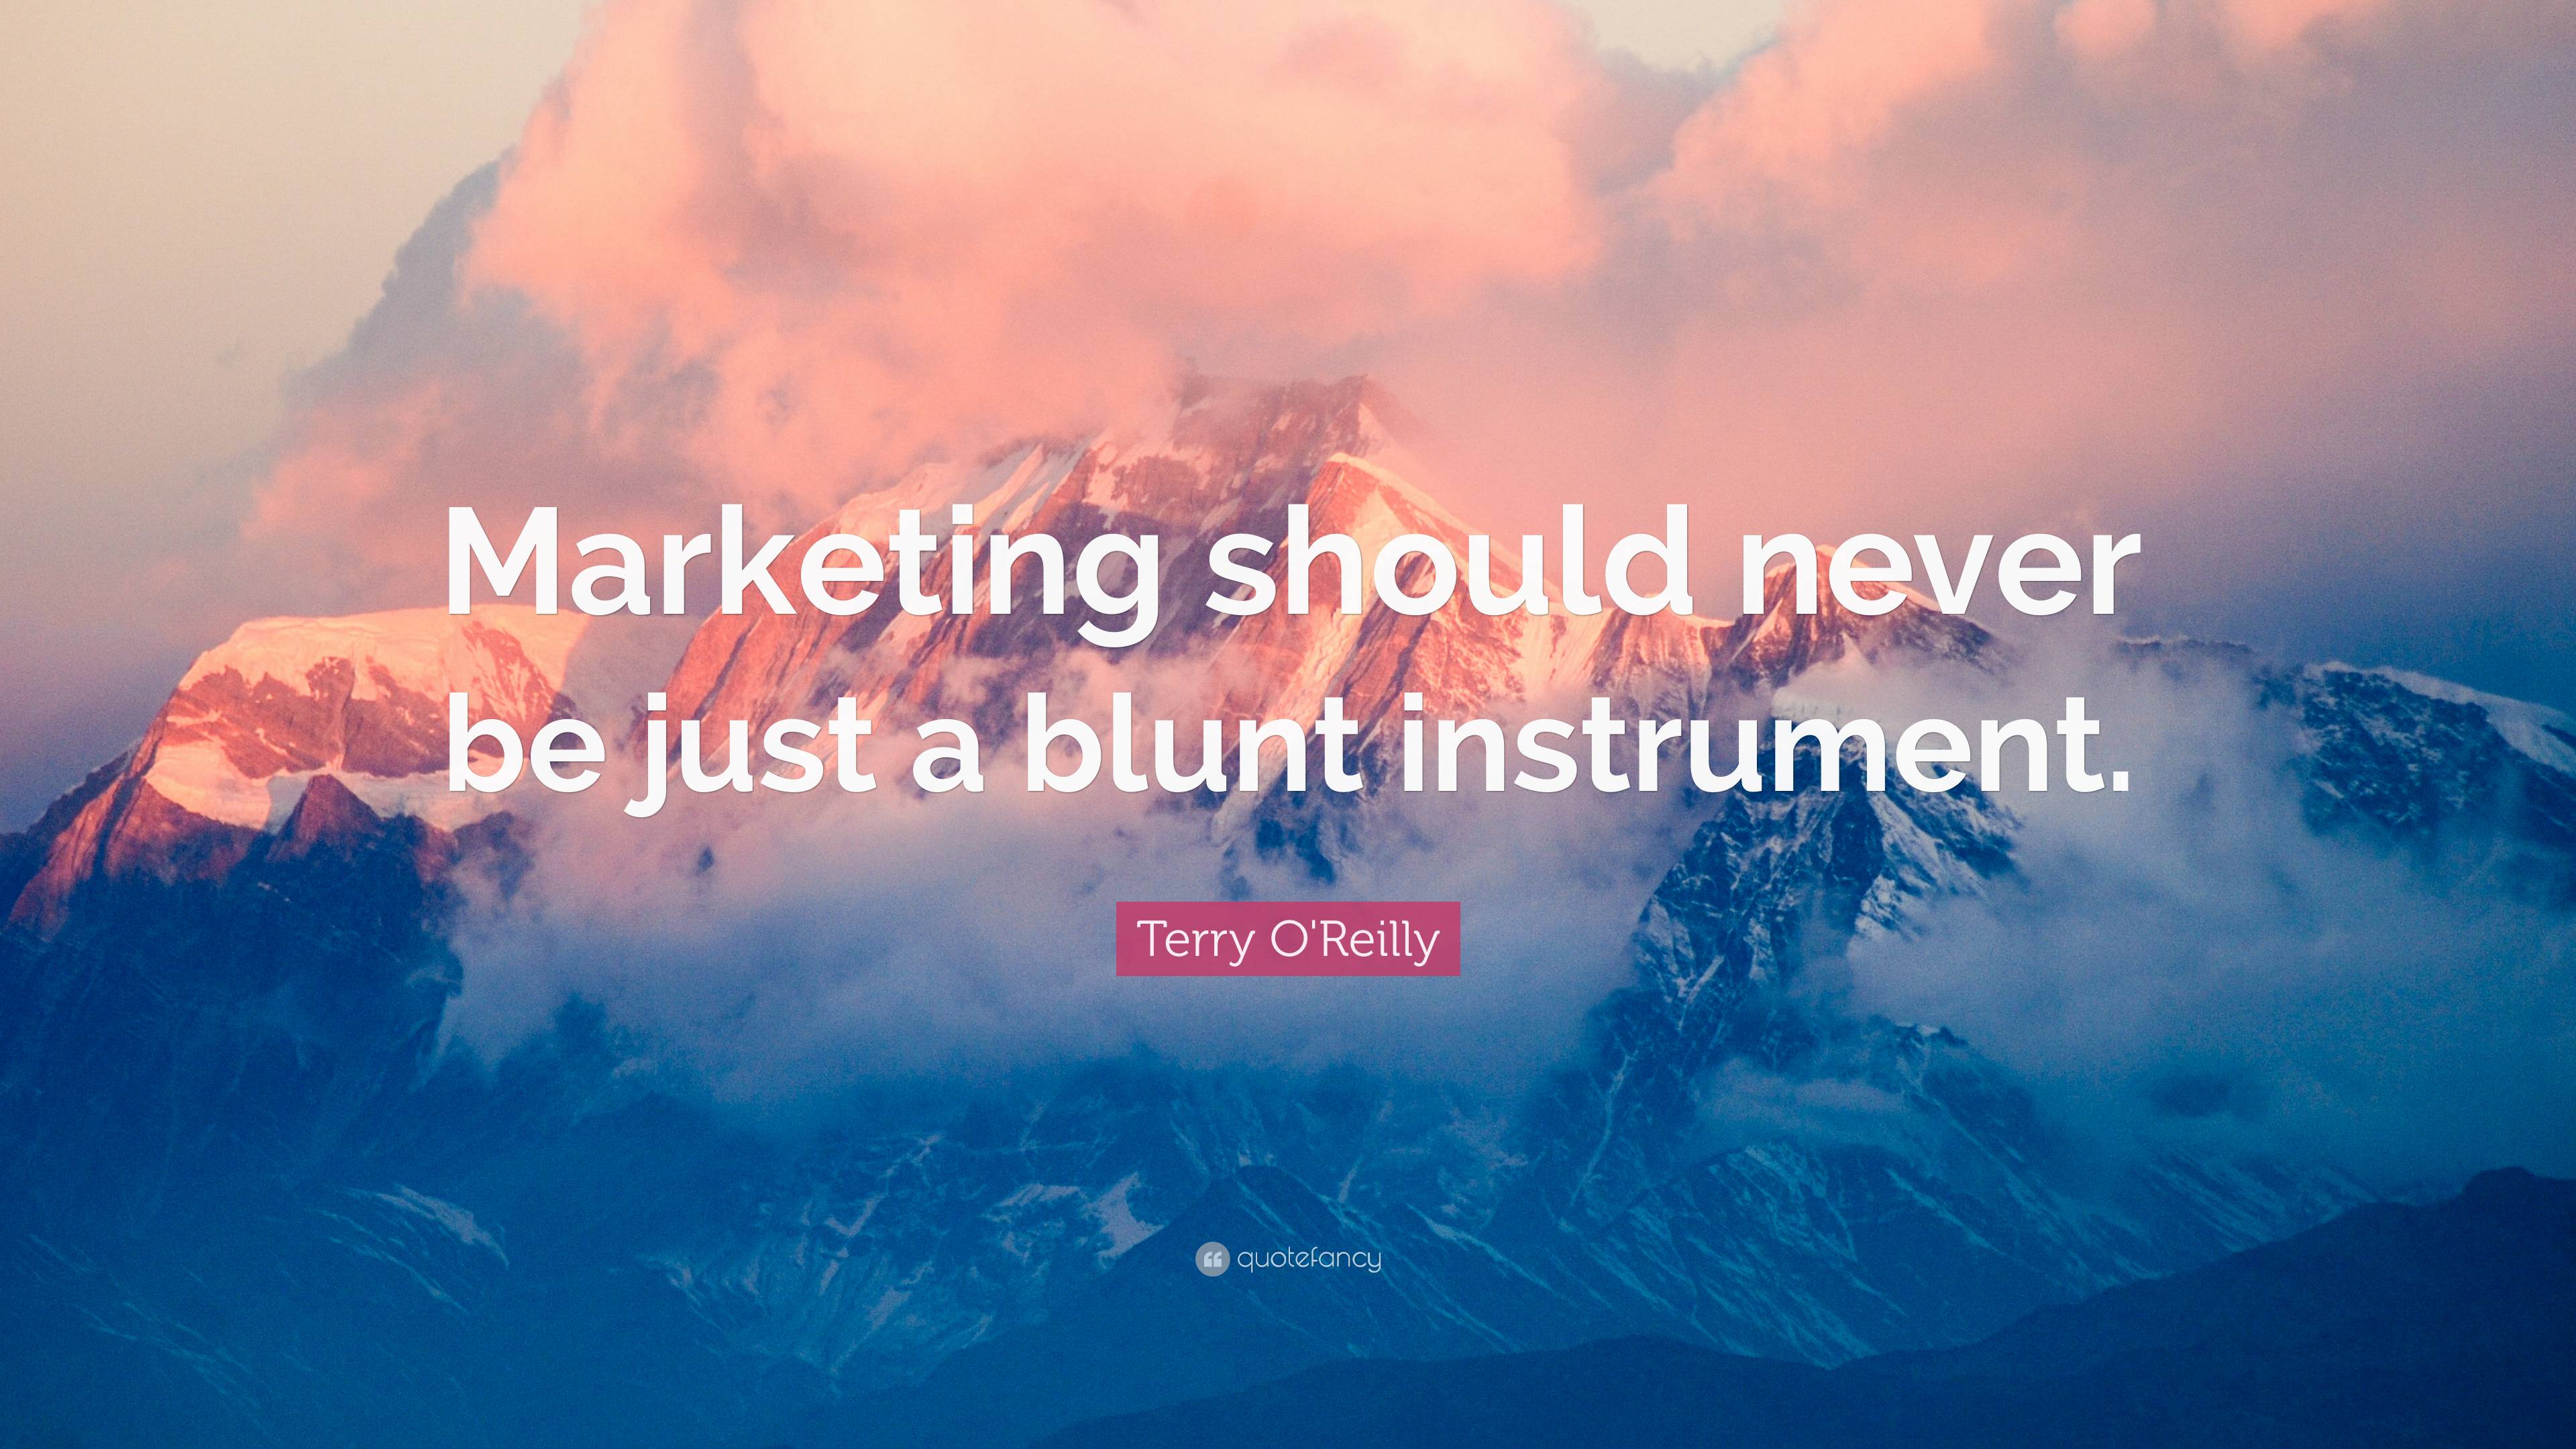 Terry O'Reilly Quote: “Marketing should never be just a blunt